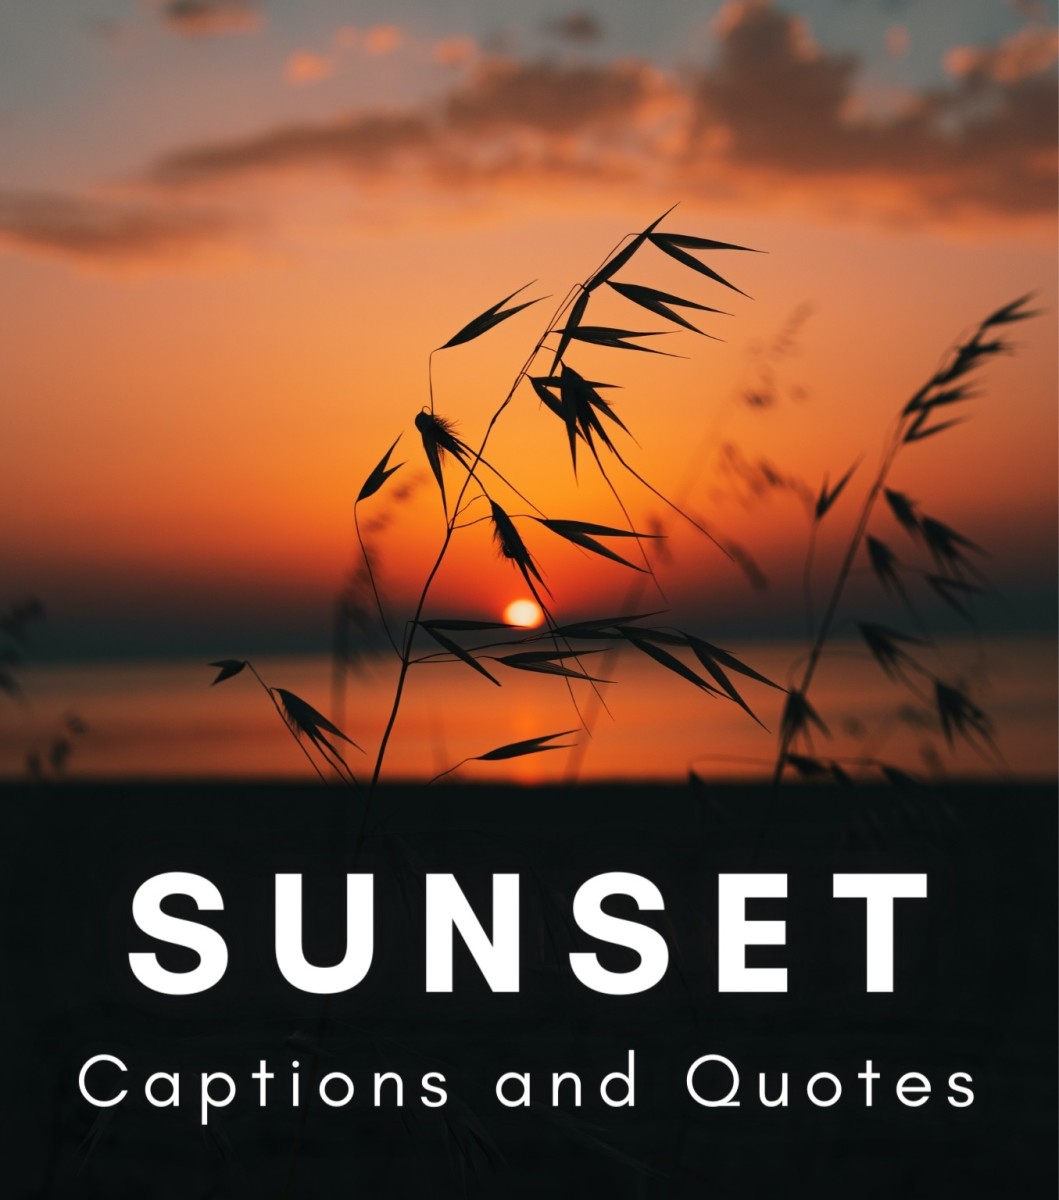 150+ Sunset Quotes and Caption Ideas for Instagram - TurboFuture